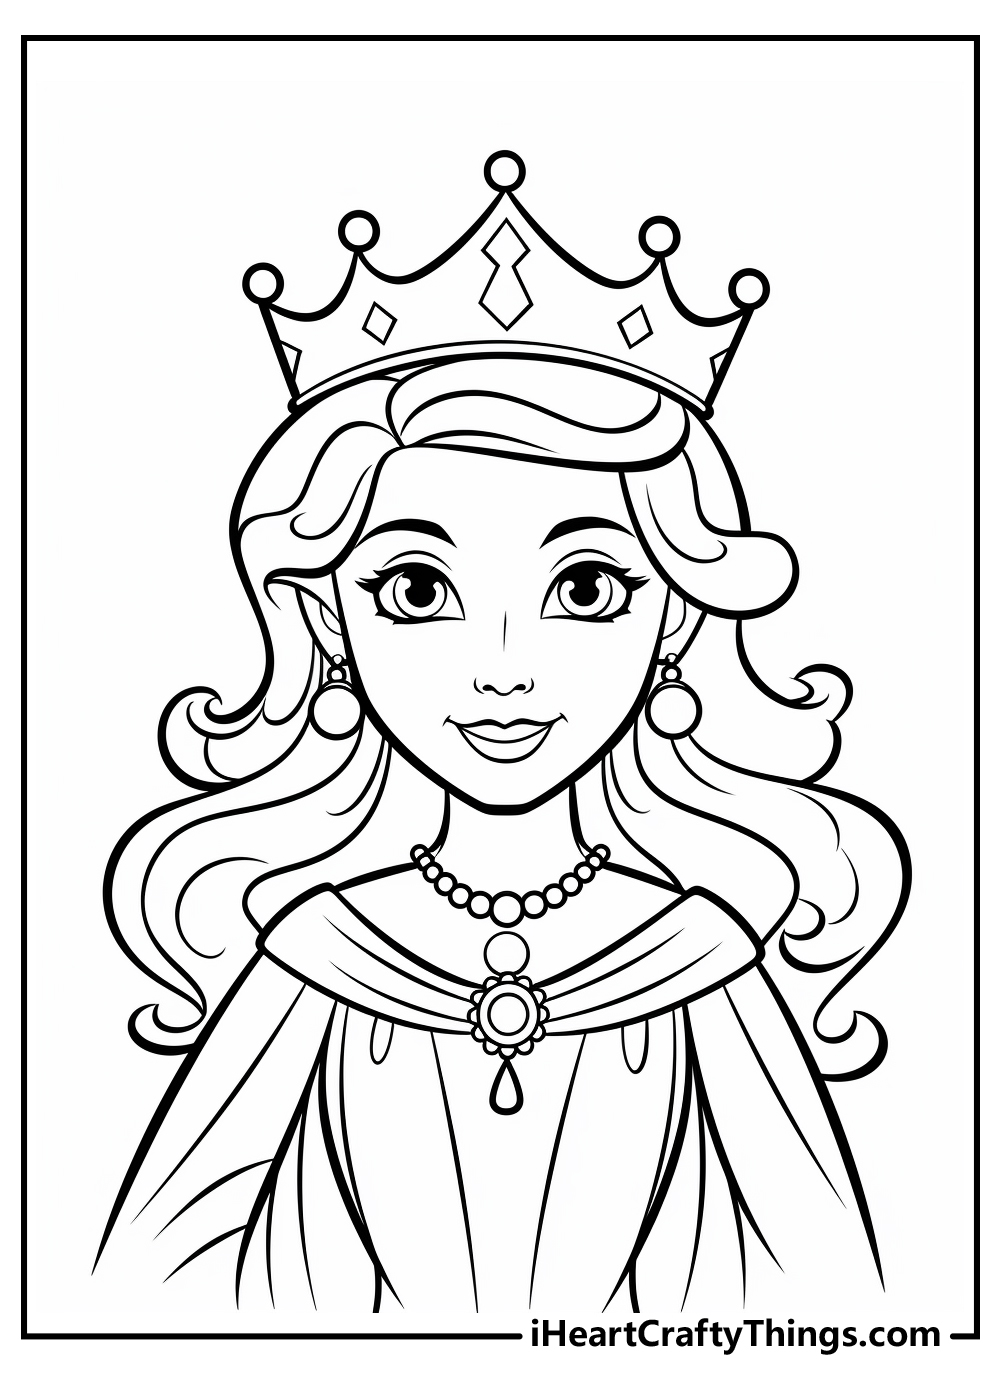 Queen Outline PNG Transparent Images Free Download | Vector Files | Pngtree